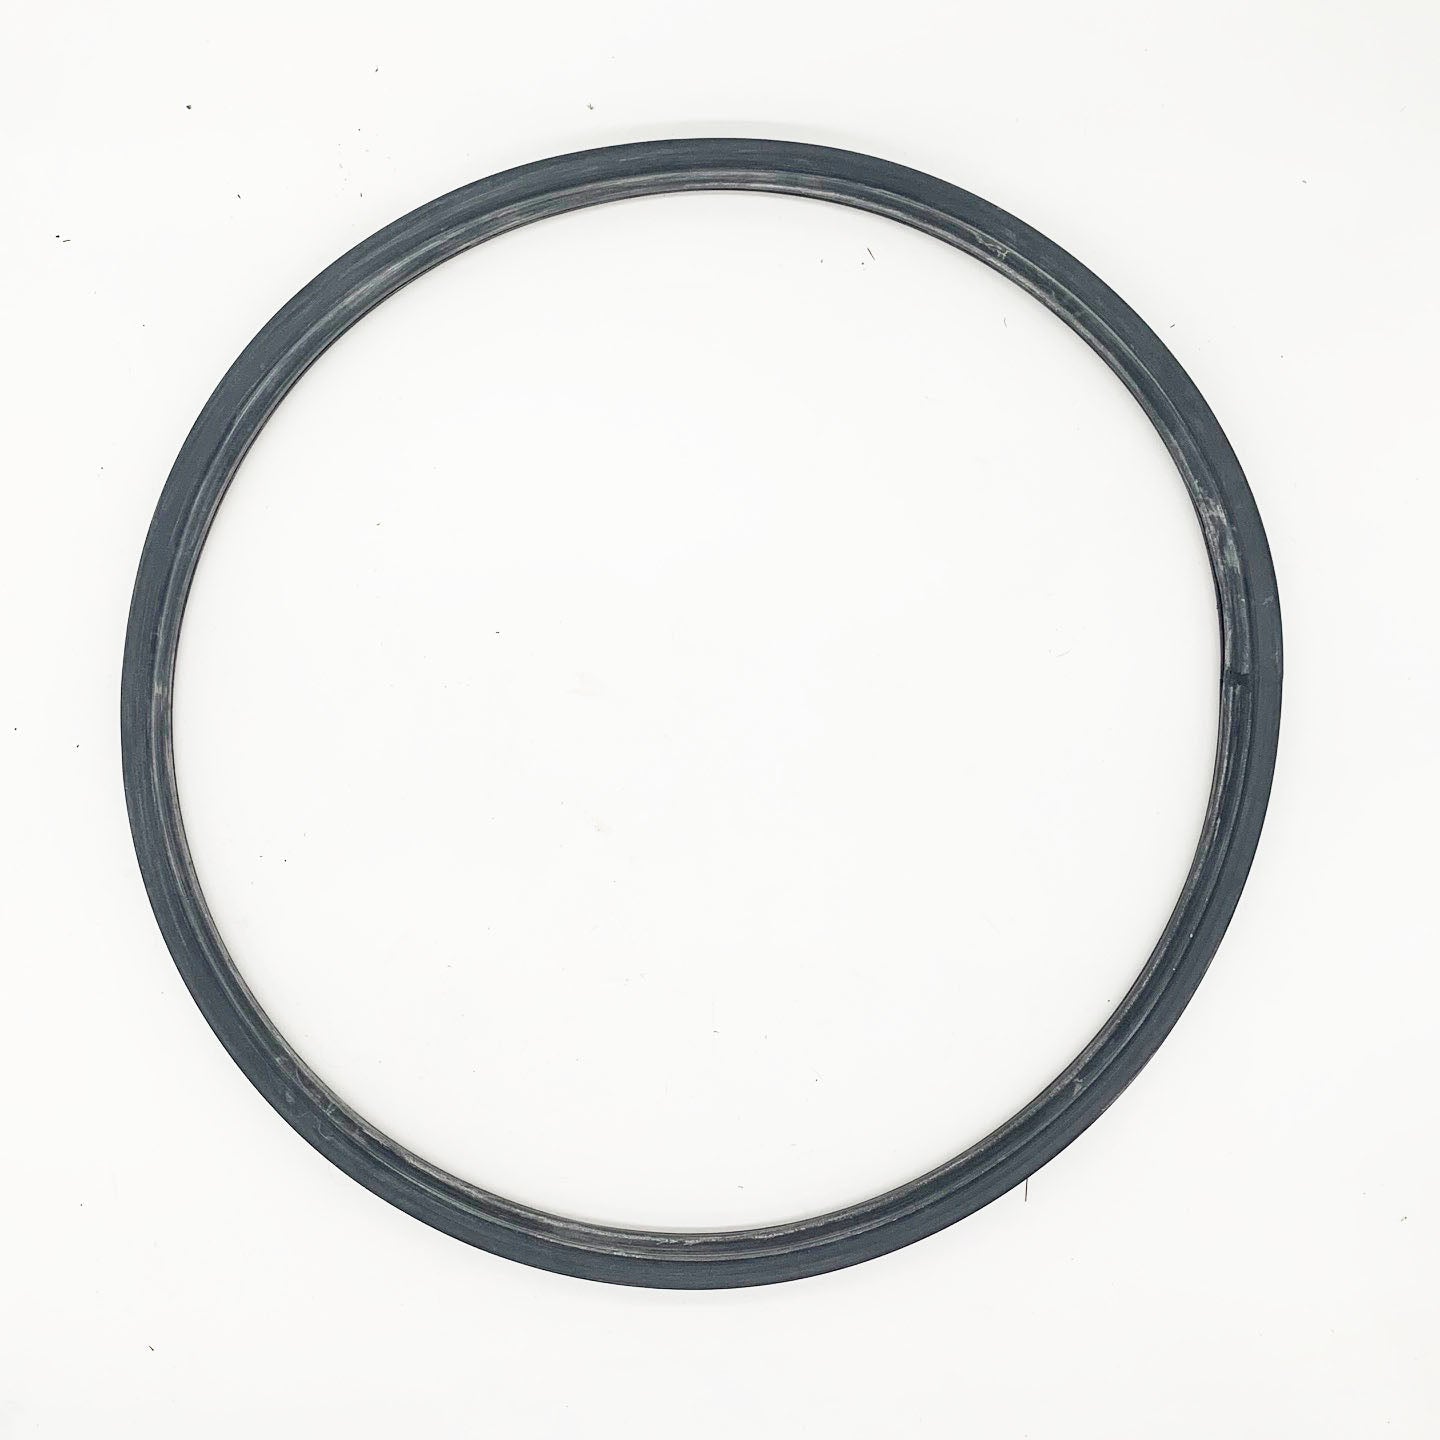 Lift Gate Window Glass Rubber Gasket, 1946-1959, Willys Station Wagon - The JeepsterMan